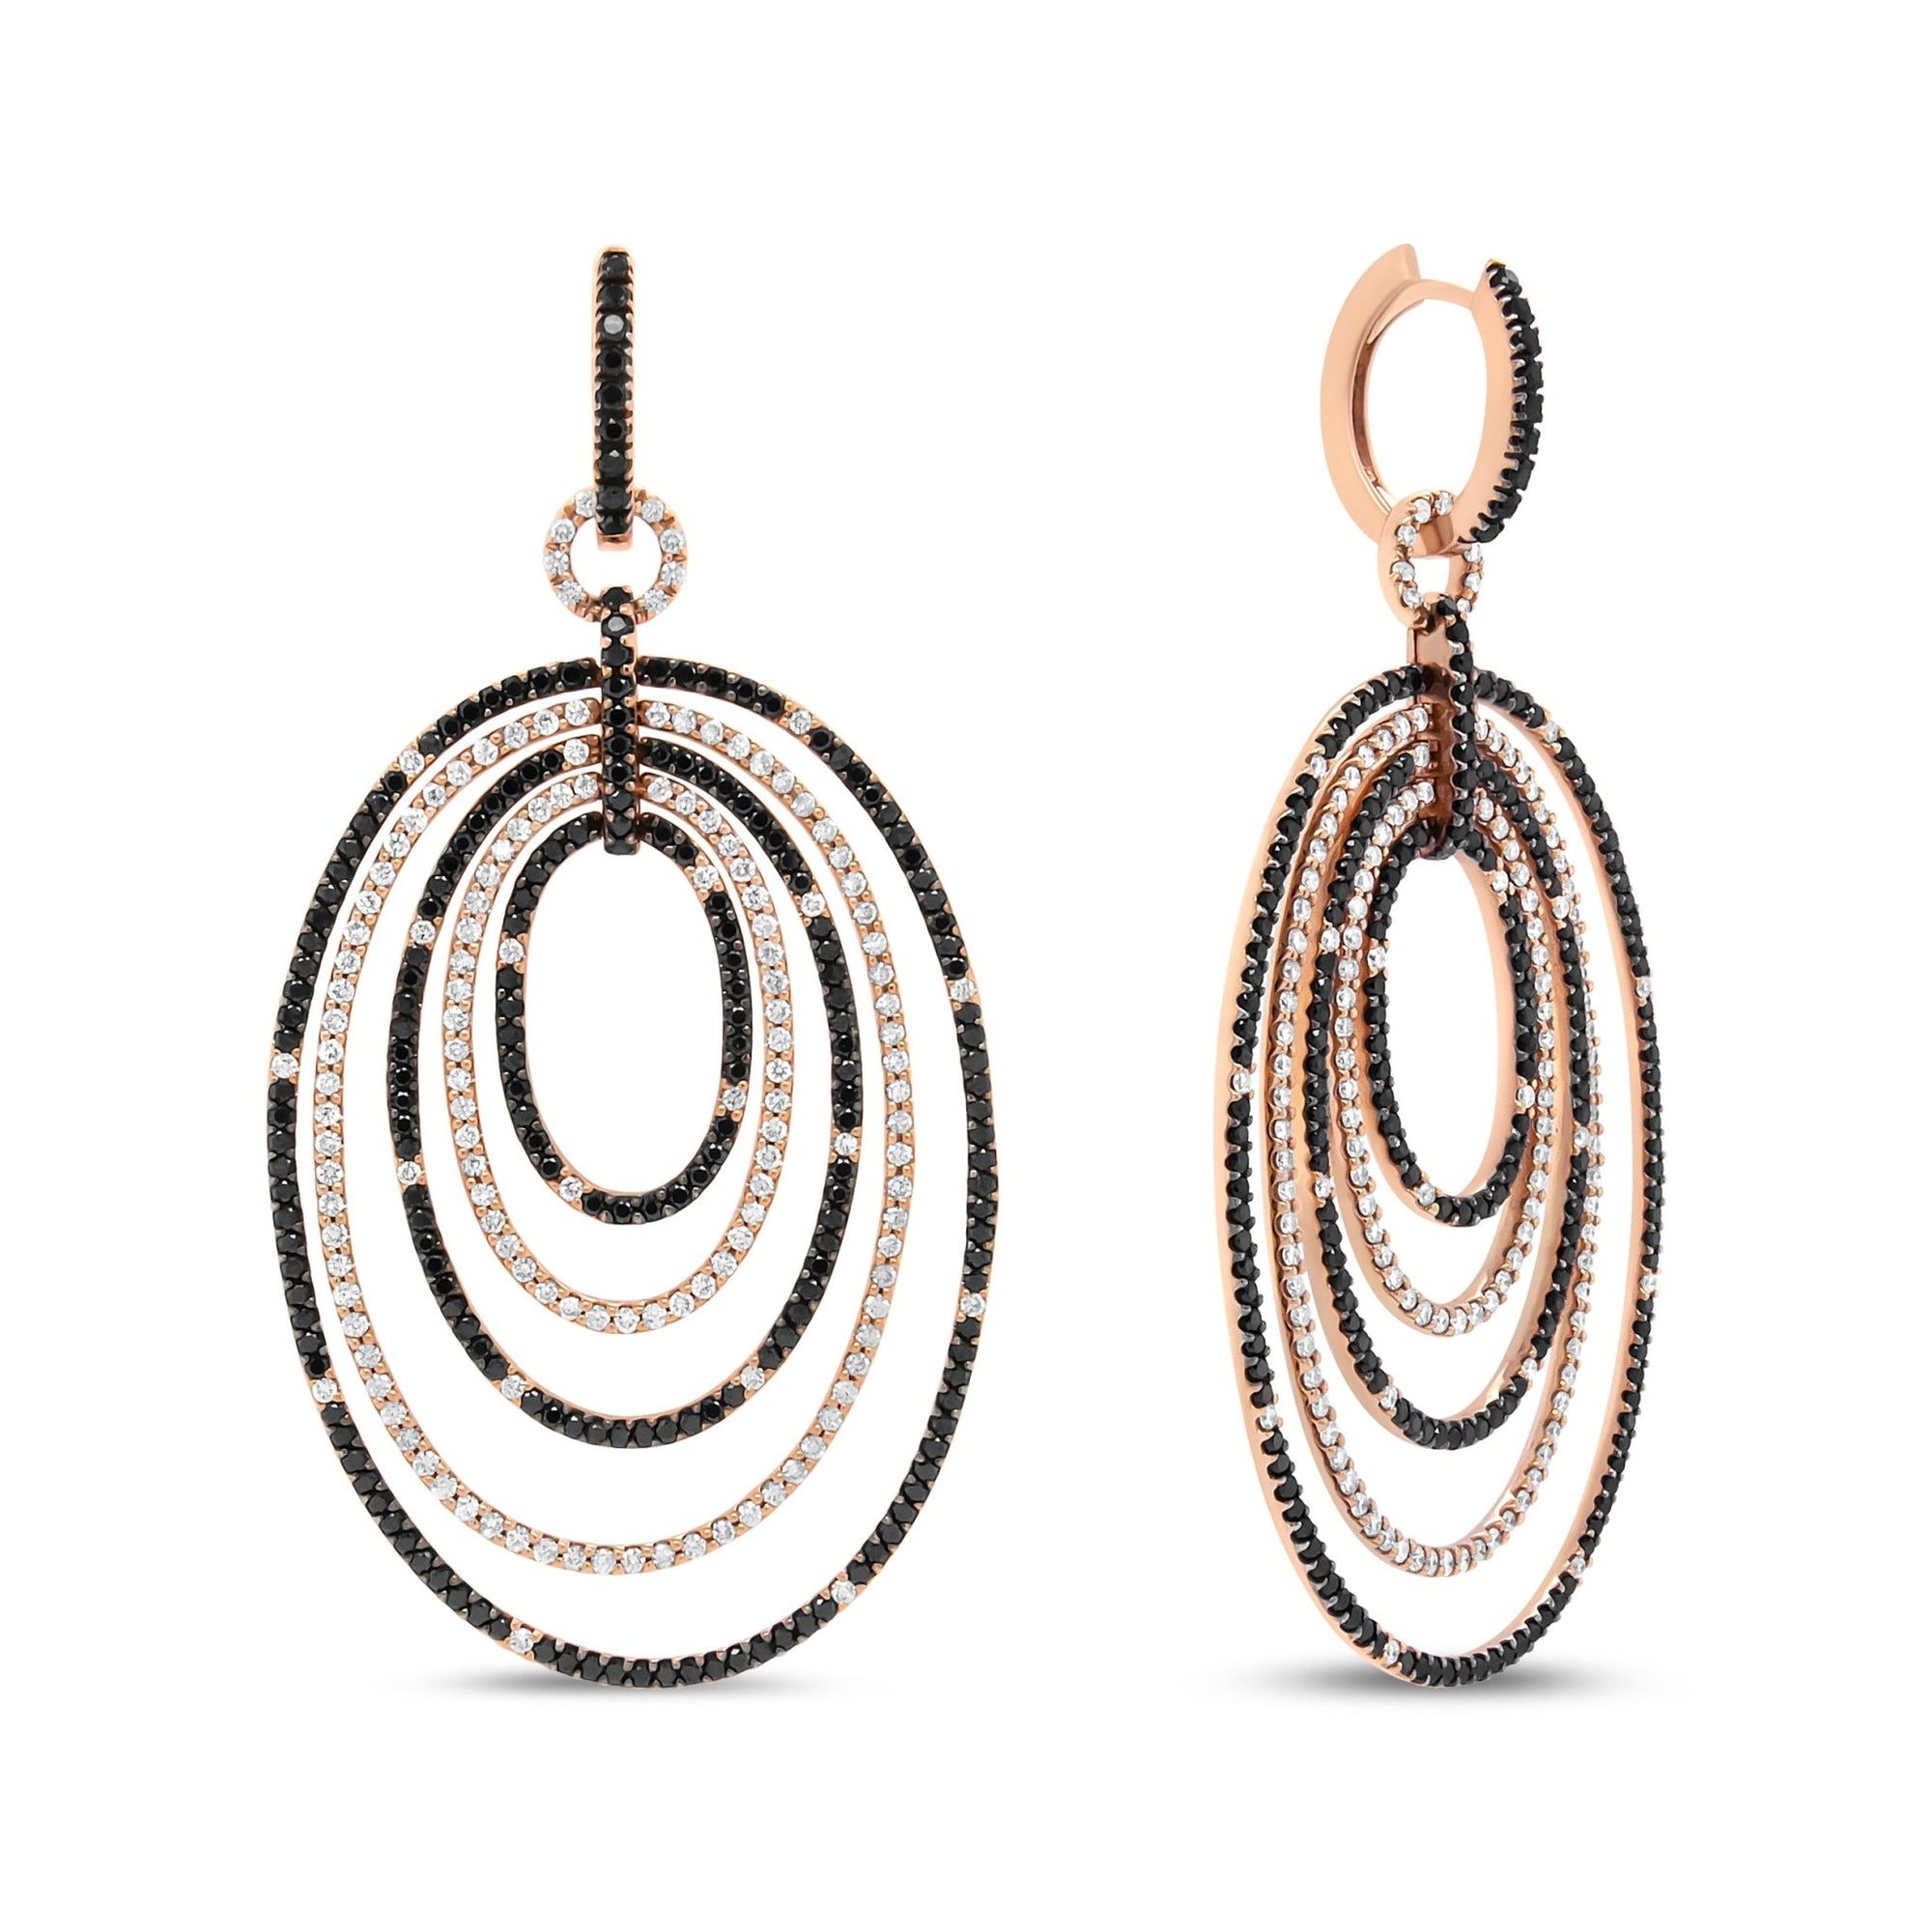 18K Rose Gold 5.00 Cttw Round Black and White Diamond Graduated Hoop Dangle Earrings (Black and F-G Color, VS1-VS2 Clarity) - LinkagejewelrydesignLinkagejewelrydesign